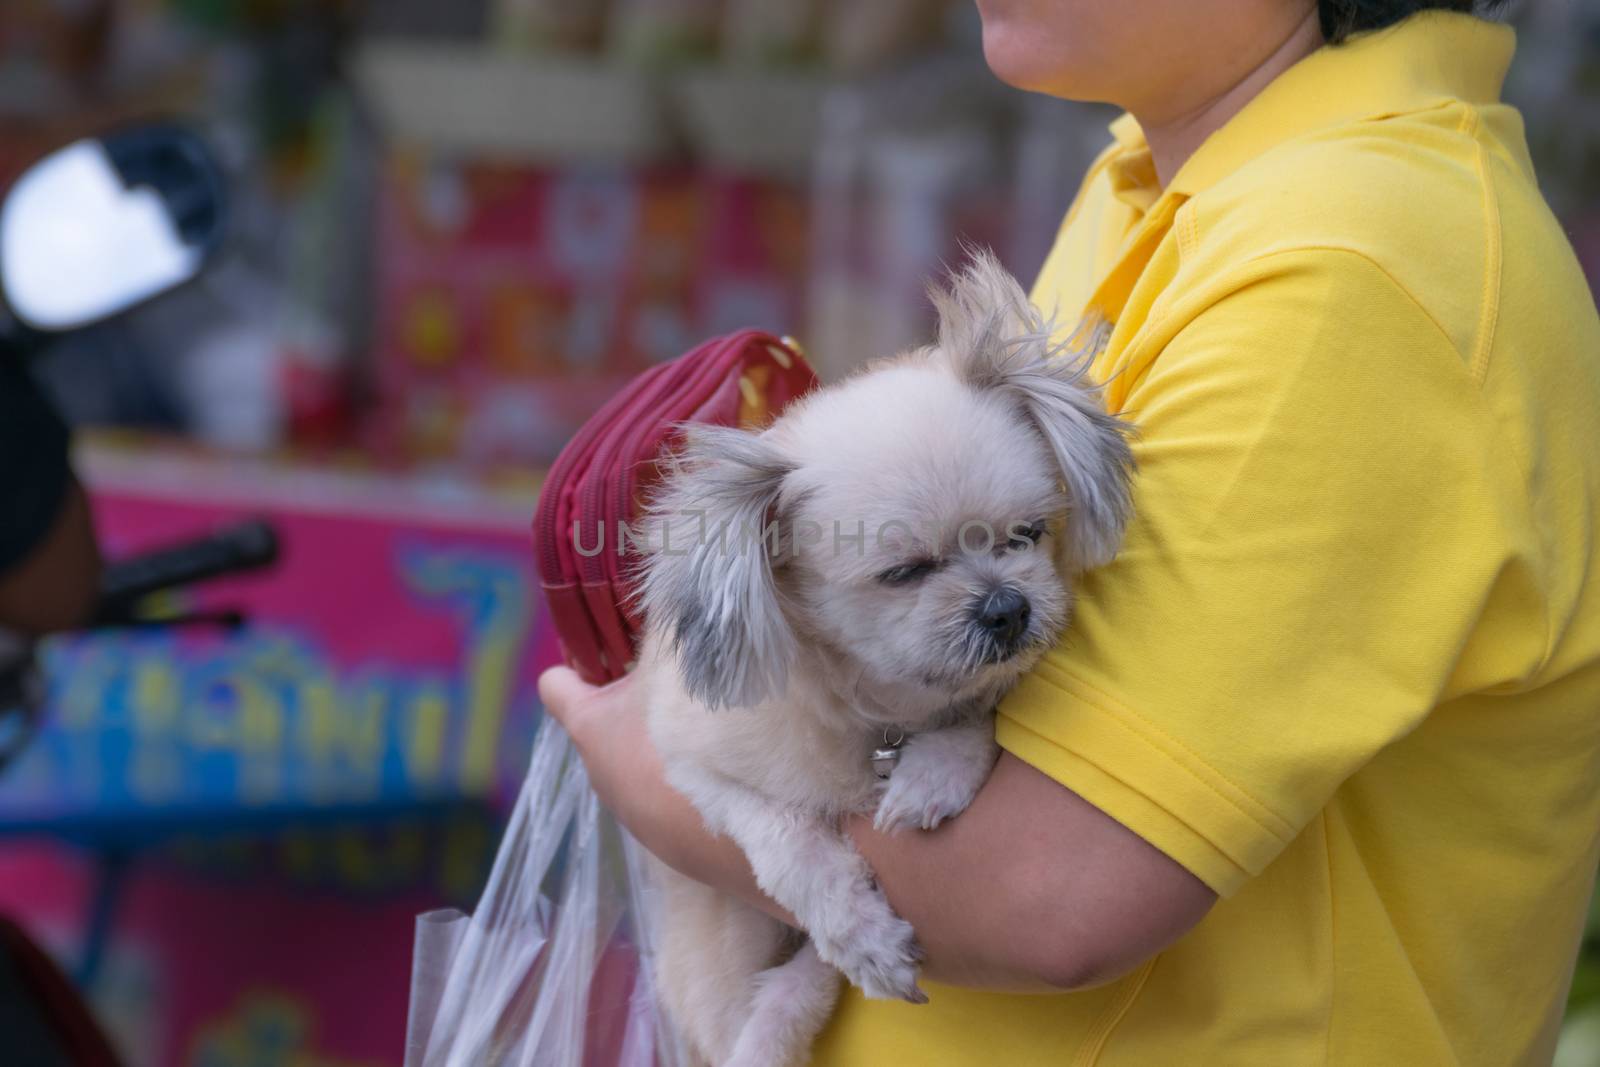 Woman hug her pet is a sleep dog so cute mixed breed with Shih-Tzu, Pomeranian and Poodle